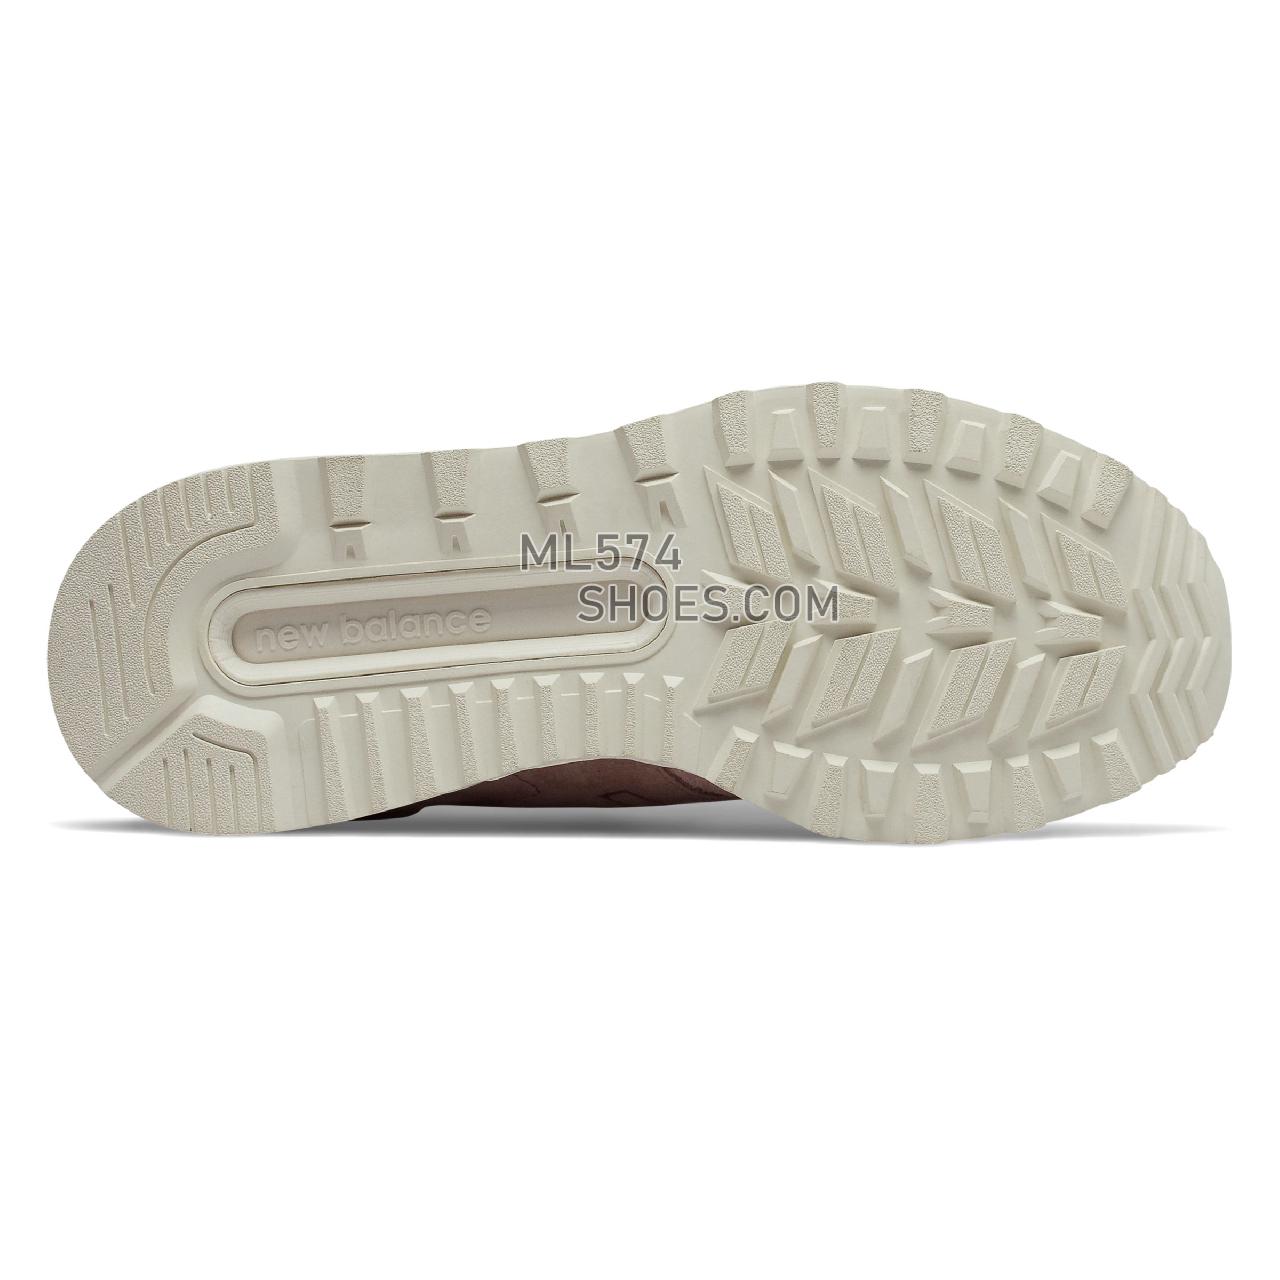 New Balance 574 Sport Decon - Women's 574 - Classic Conch Shell with Flat White - WS574DUK